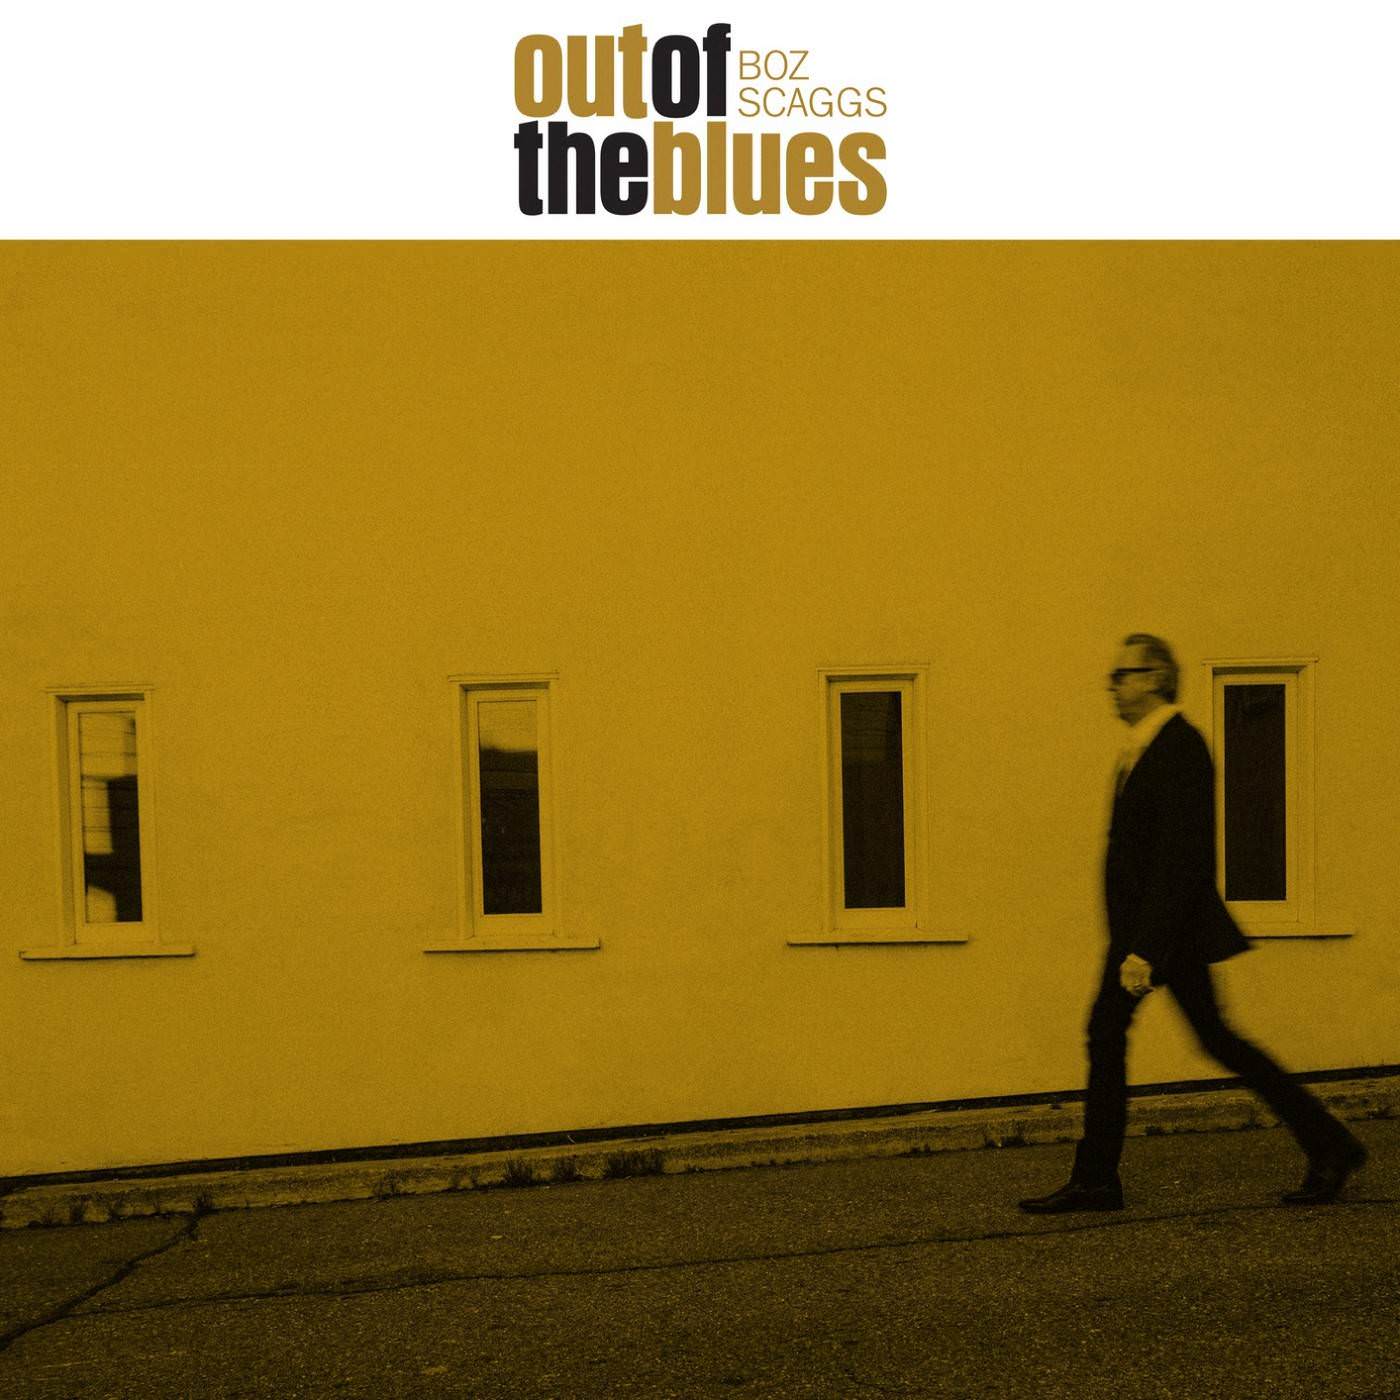 Boz Scaggs – Out of the Blues (2018) [FLAC 24bit/96kHz]